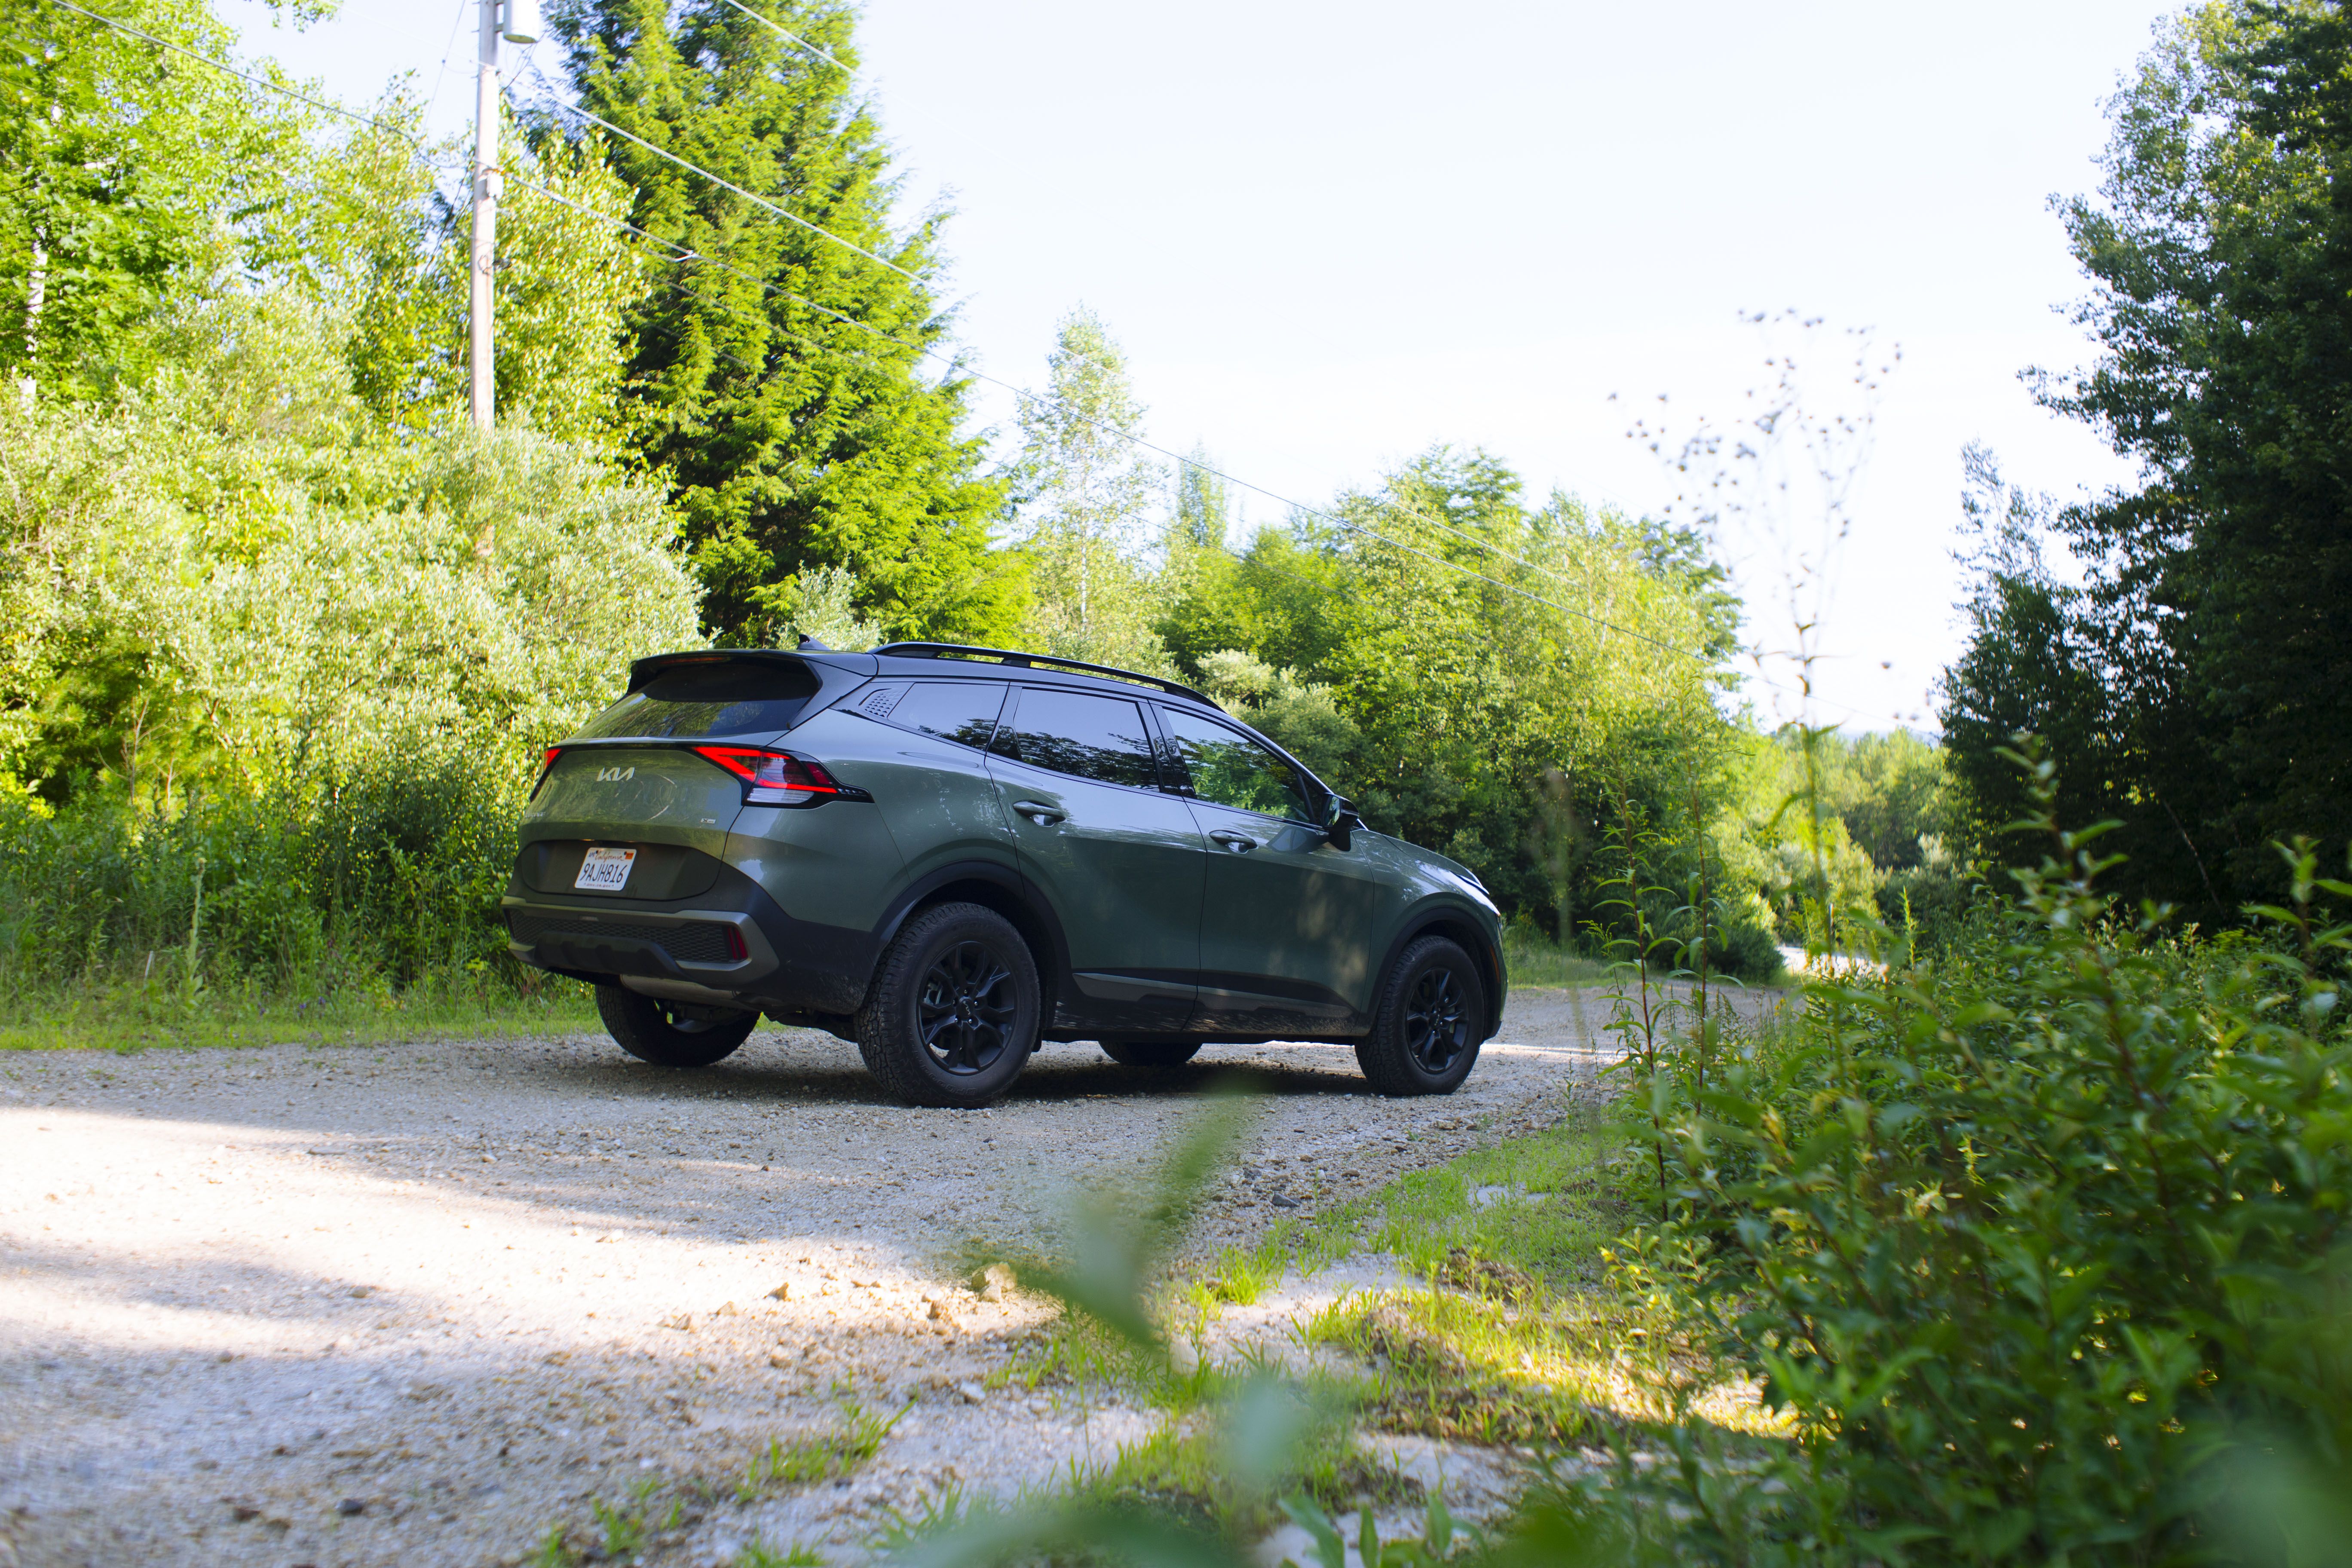 Kia Sportage review: this crossover was born to be mild